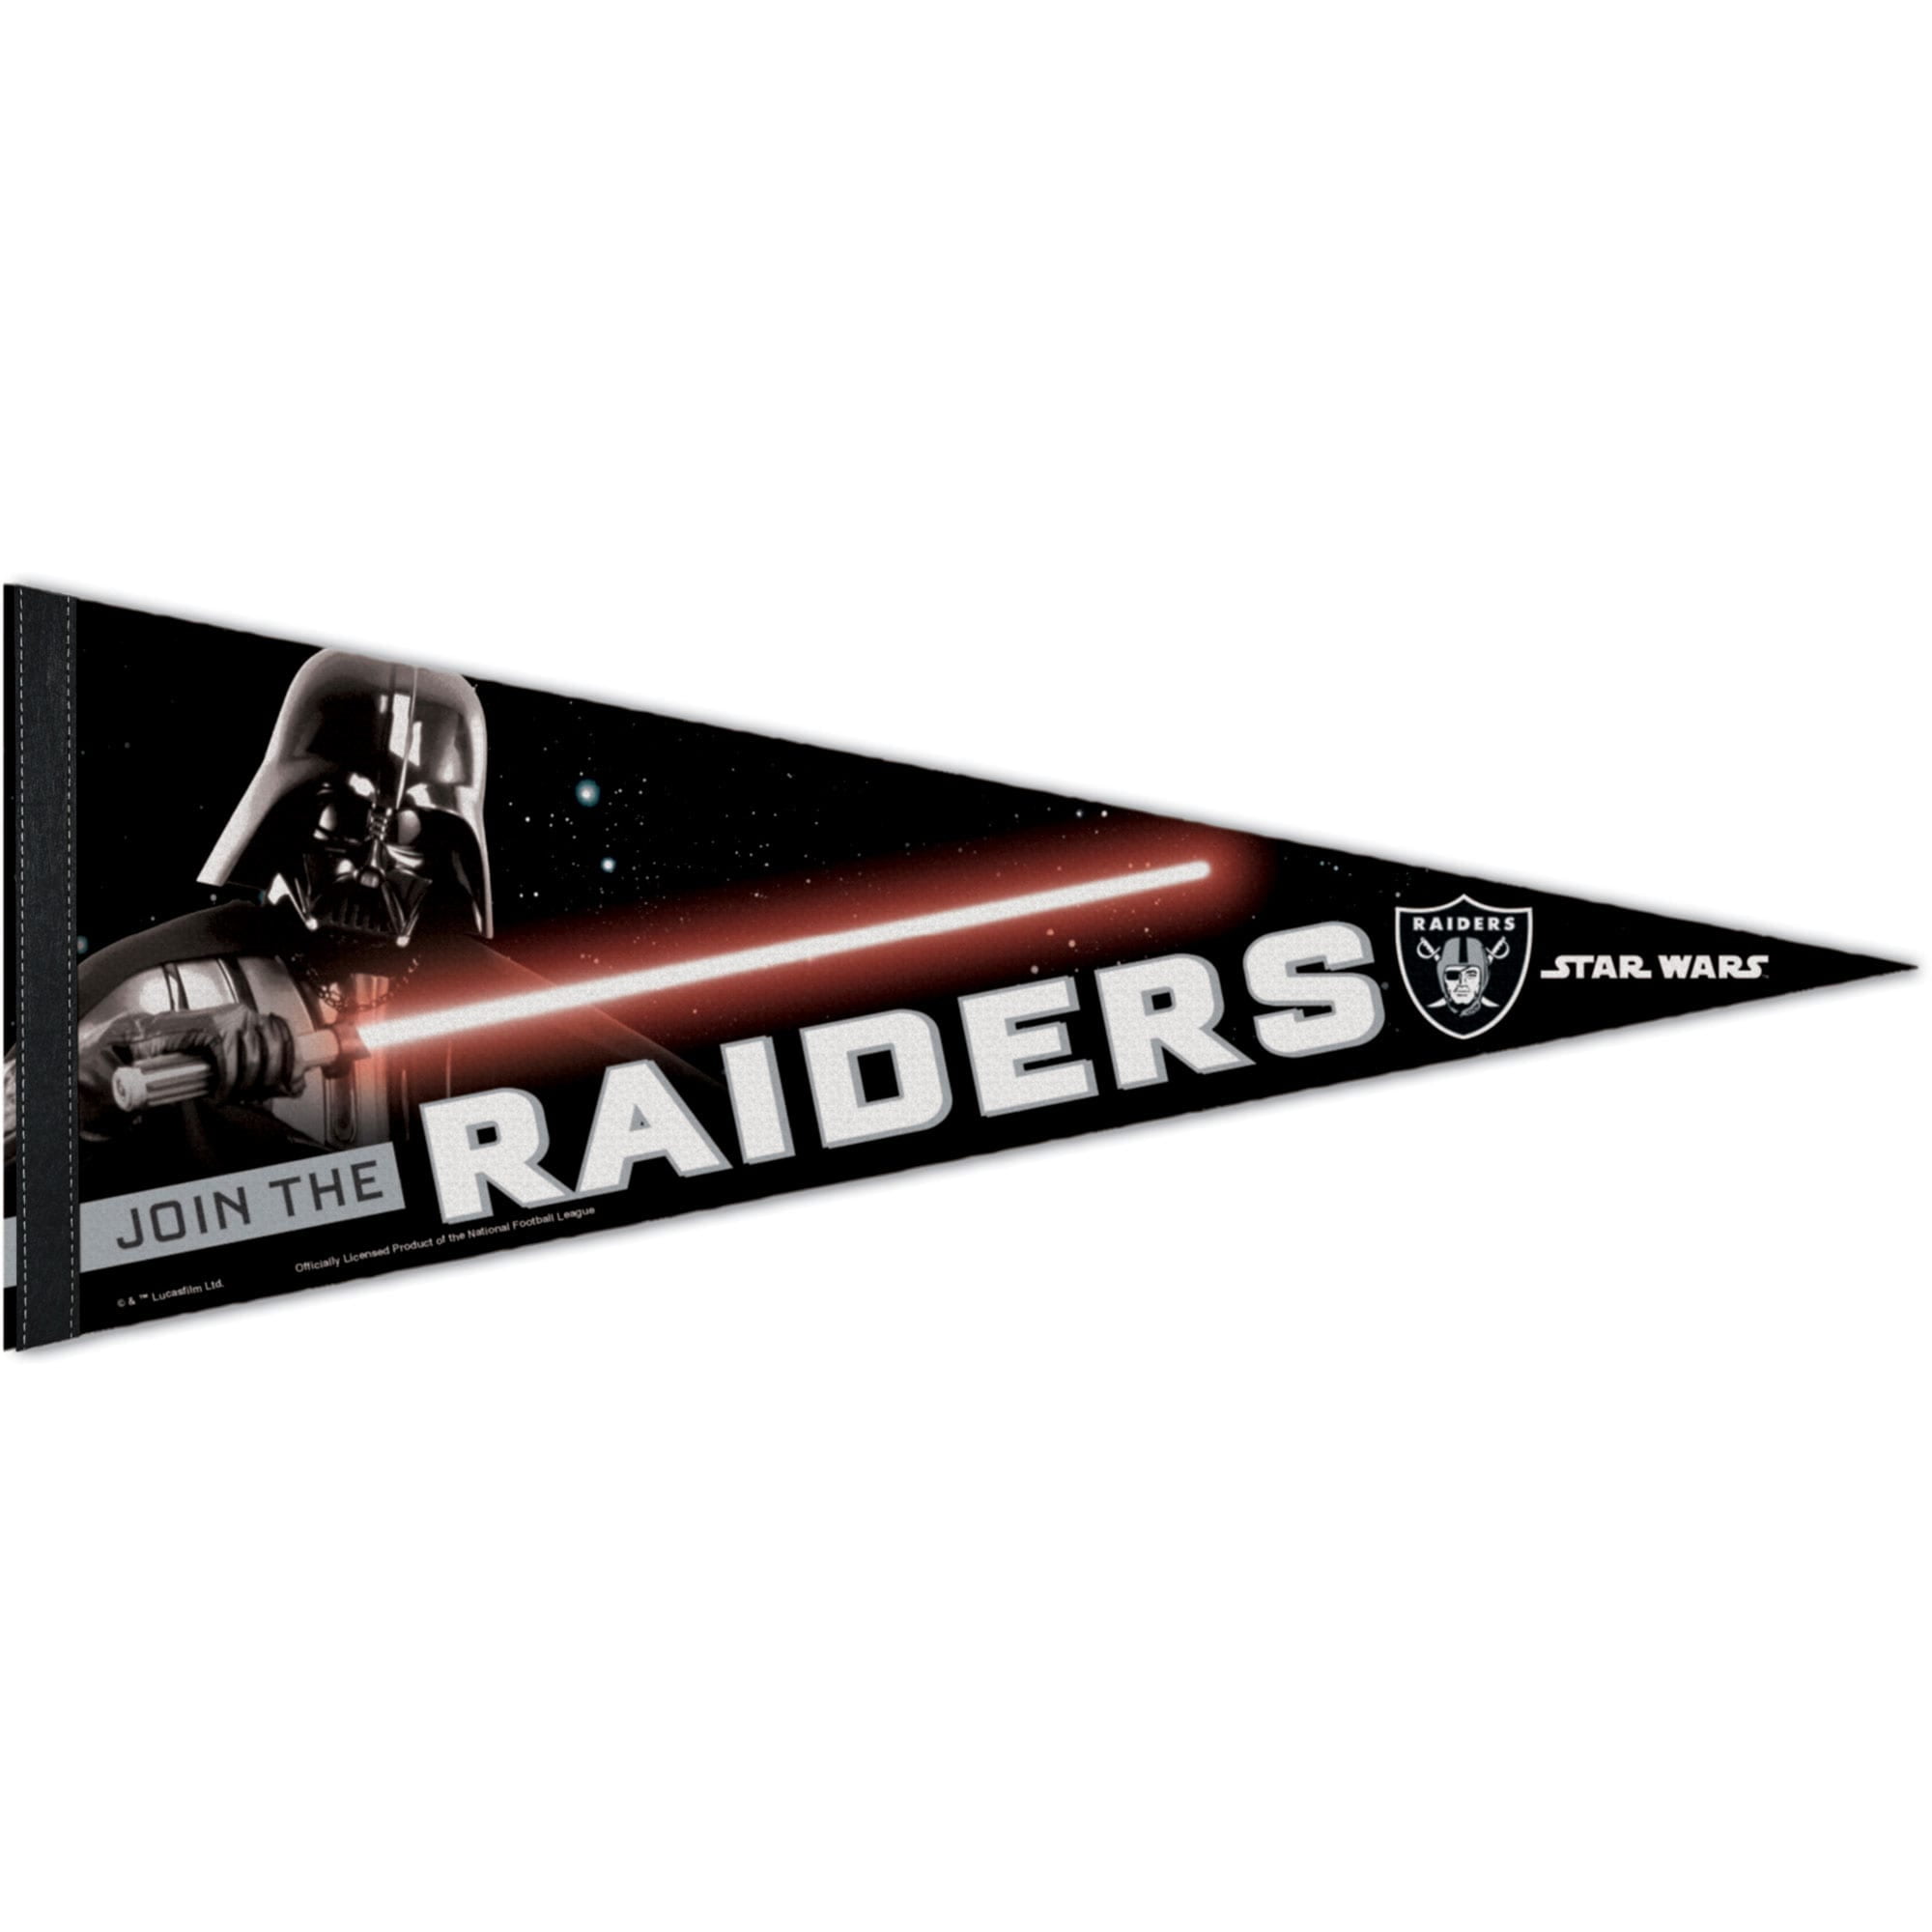 OAKLAND RAIDERS DARTH VADER JOIN THE RAIDERS  ROLL UP PENNANT 12"x30" WINCRAFT 